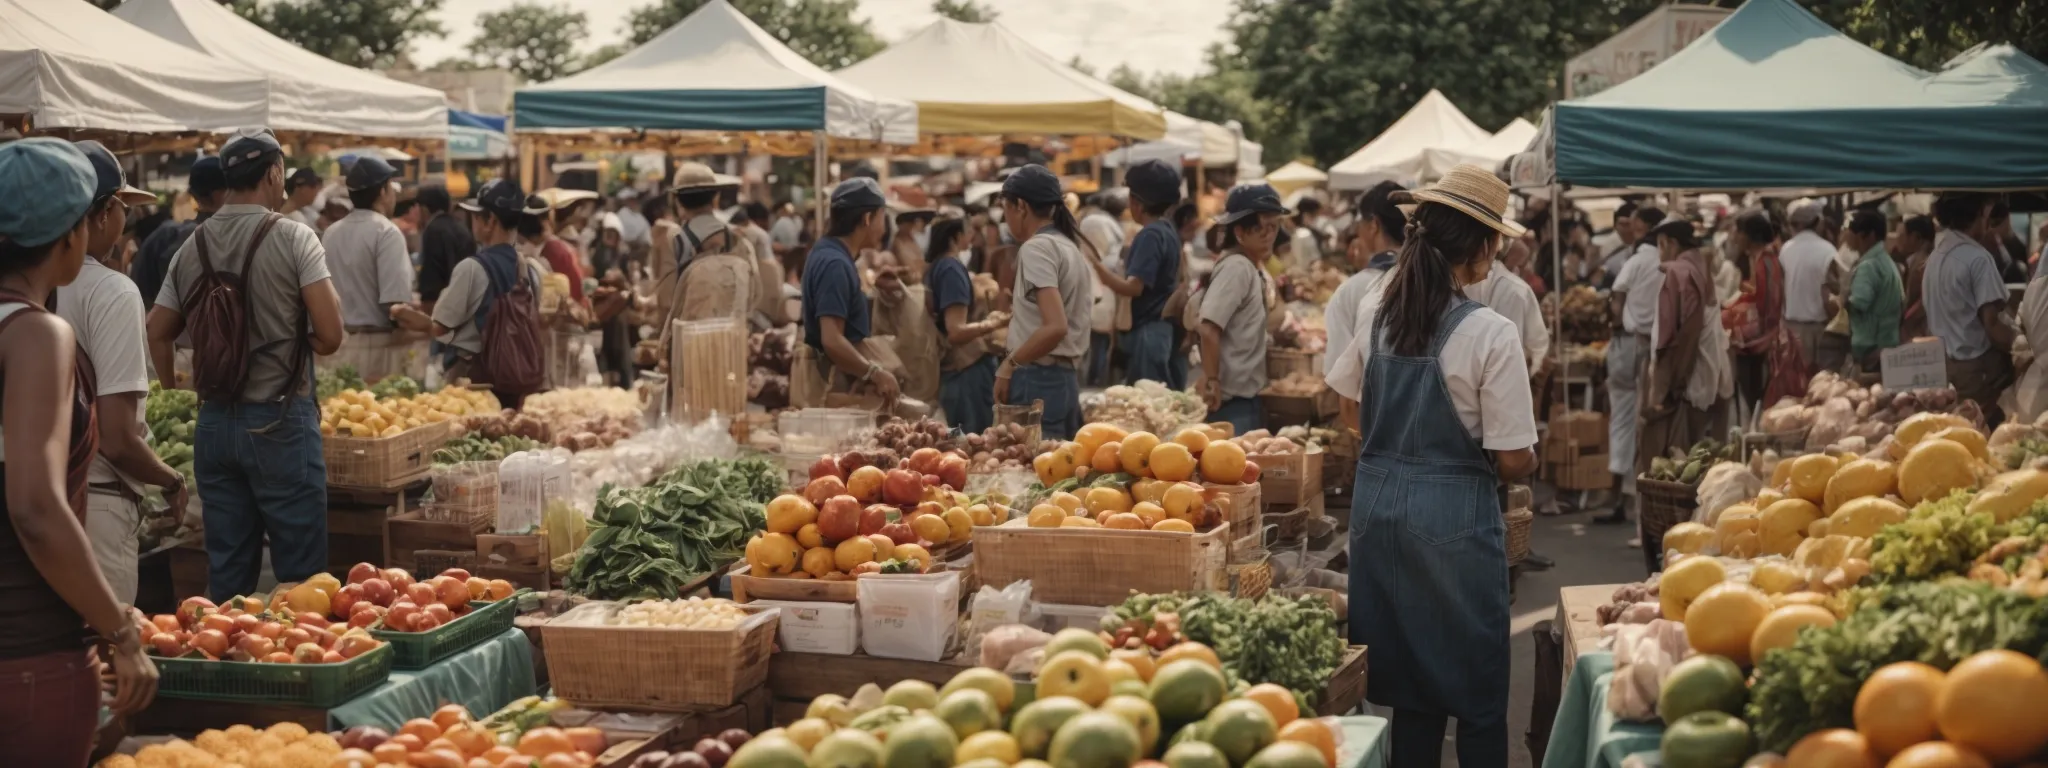 a bustling farmers' market with lively interactions between local vendors and community members.